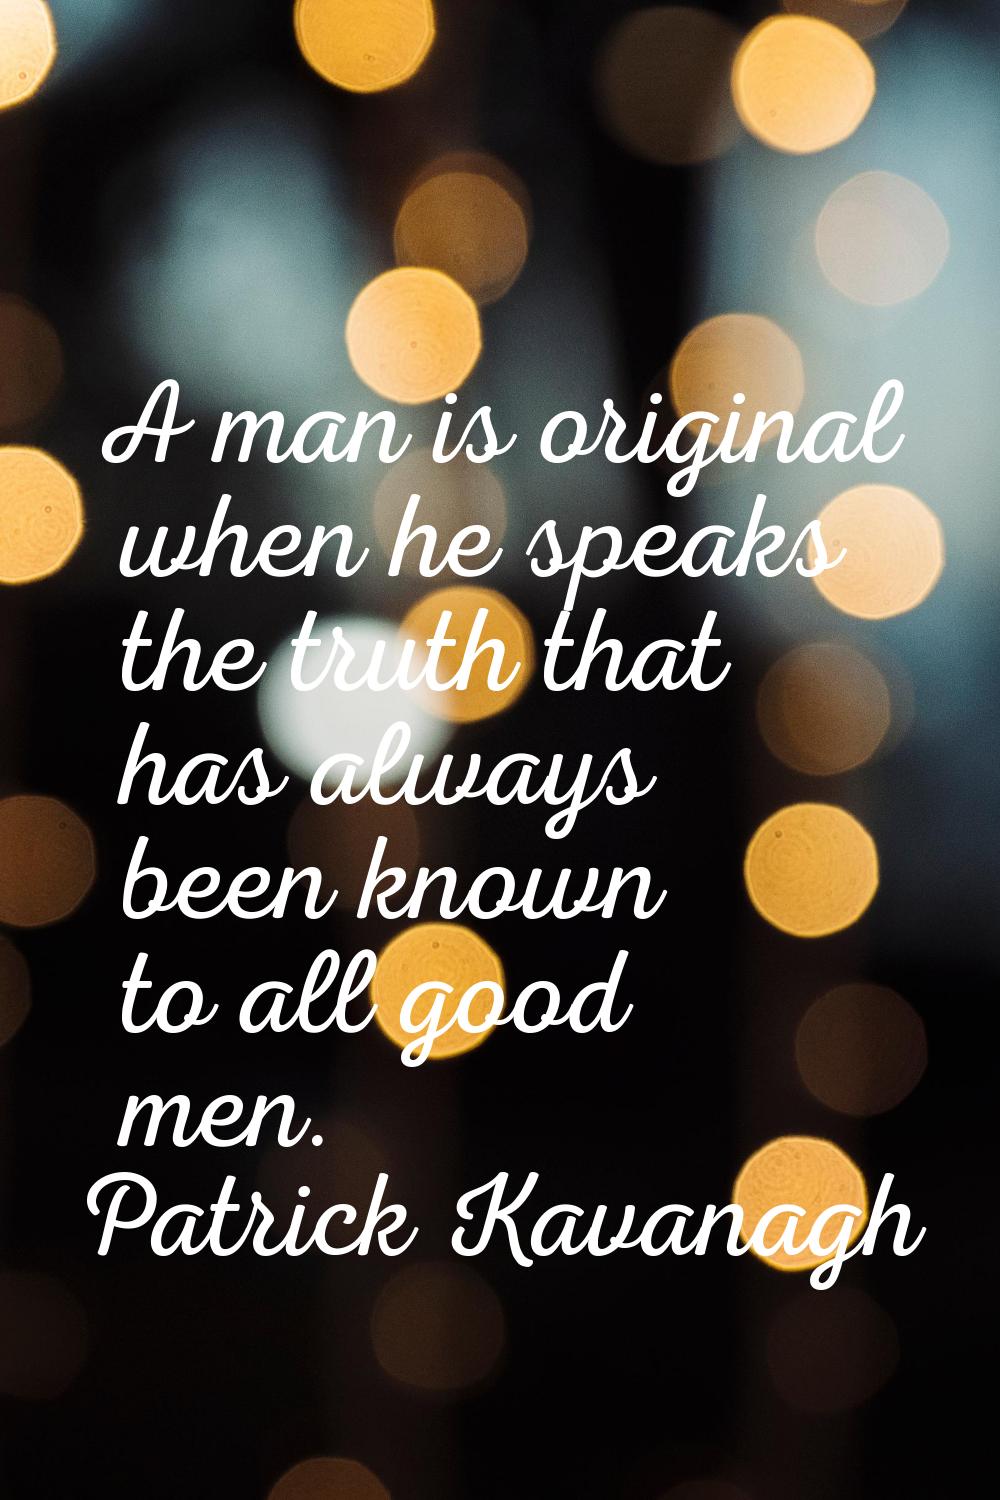 A man is original when he speaks the truth that has always been known to all good men.